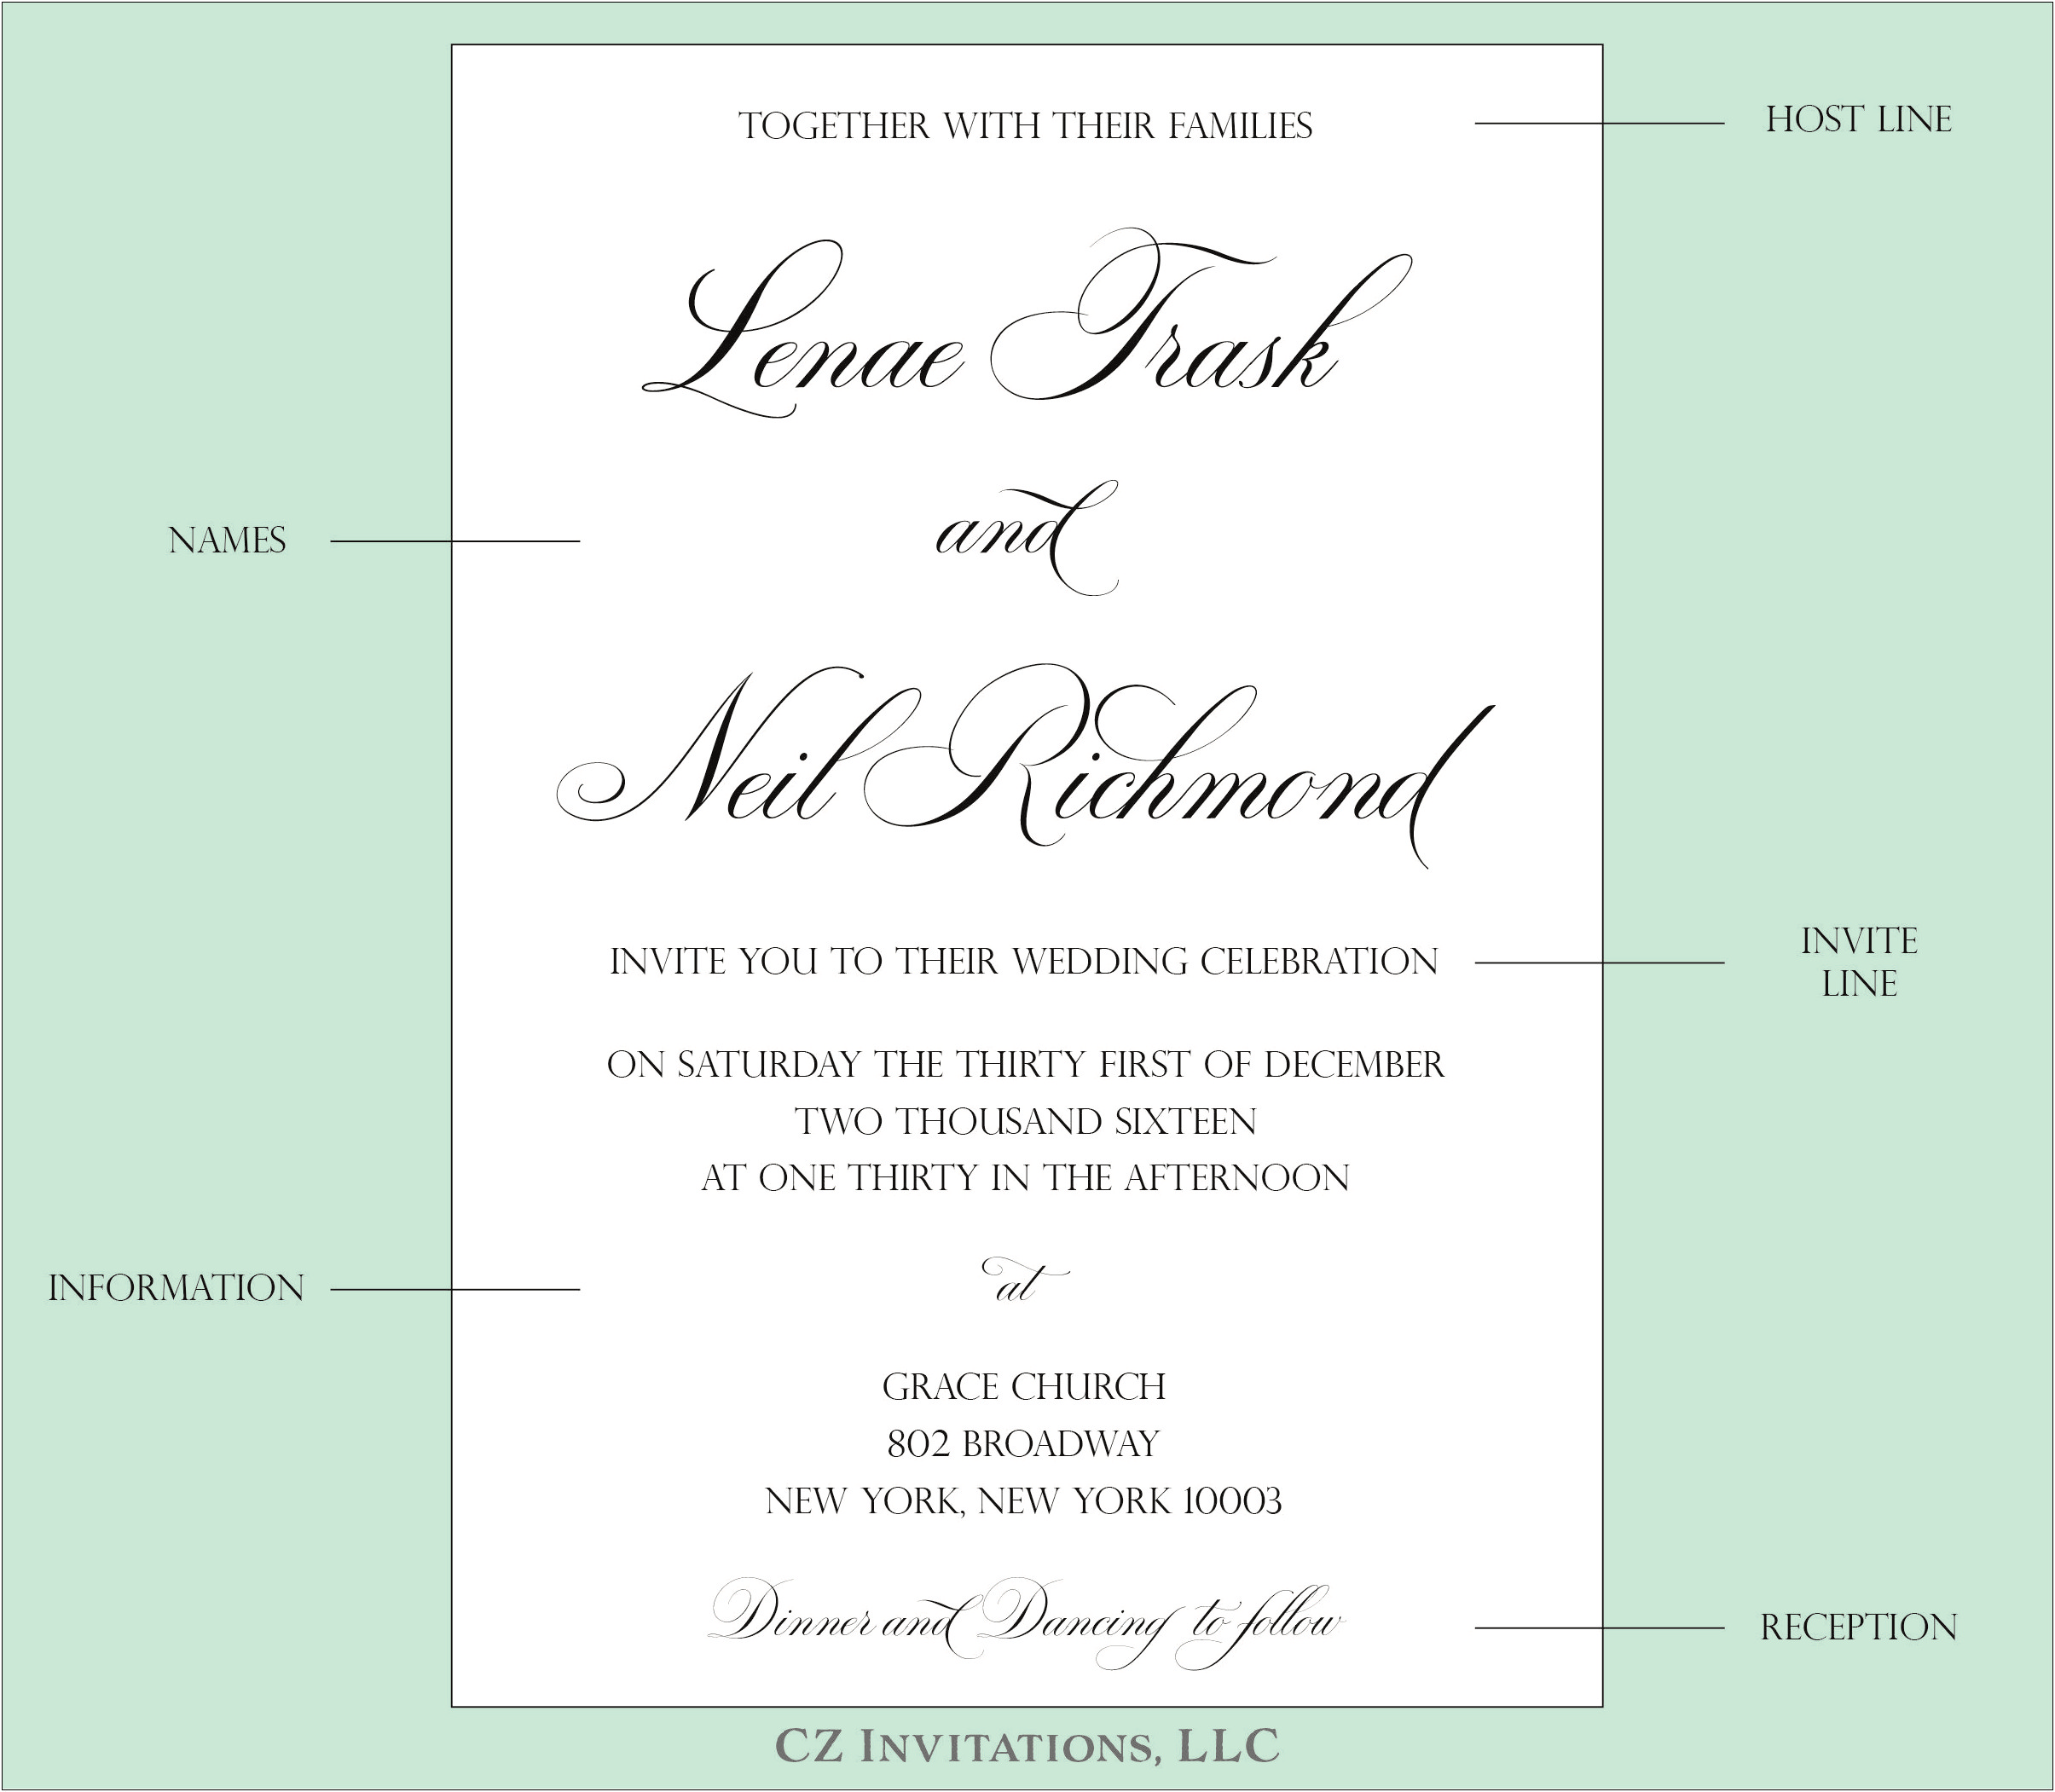 Invitation Message For Wedding By Groom